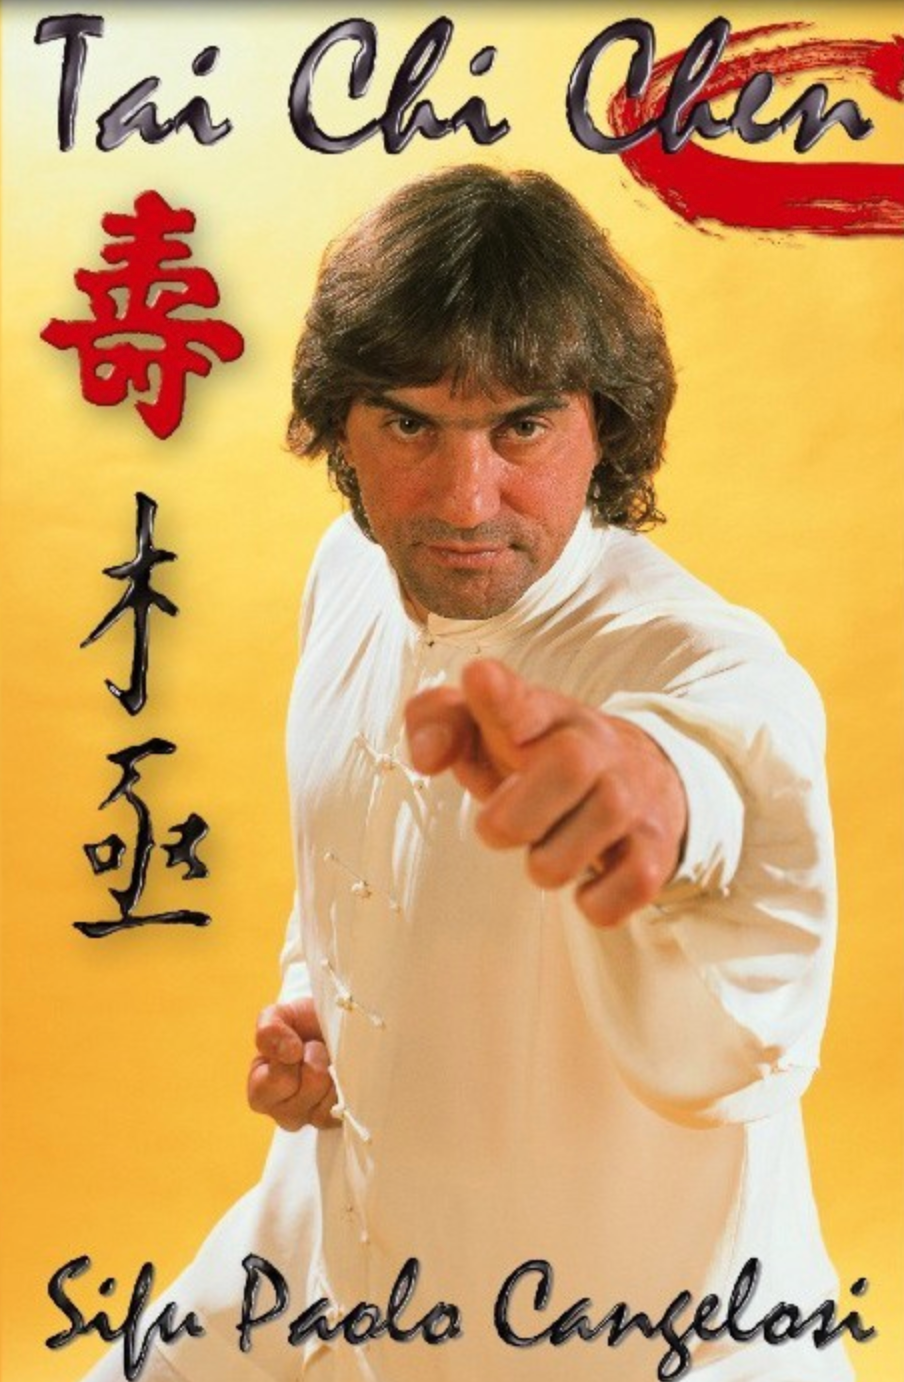 Tai Chi Chen Xia Jia Pao Chuie Form DVD with Paulo Cangelosi - Budovideos Inc